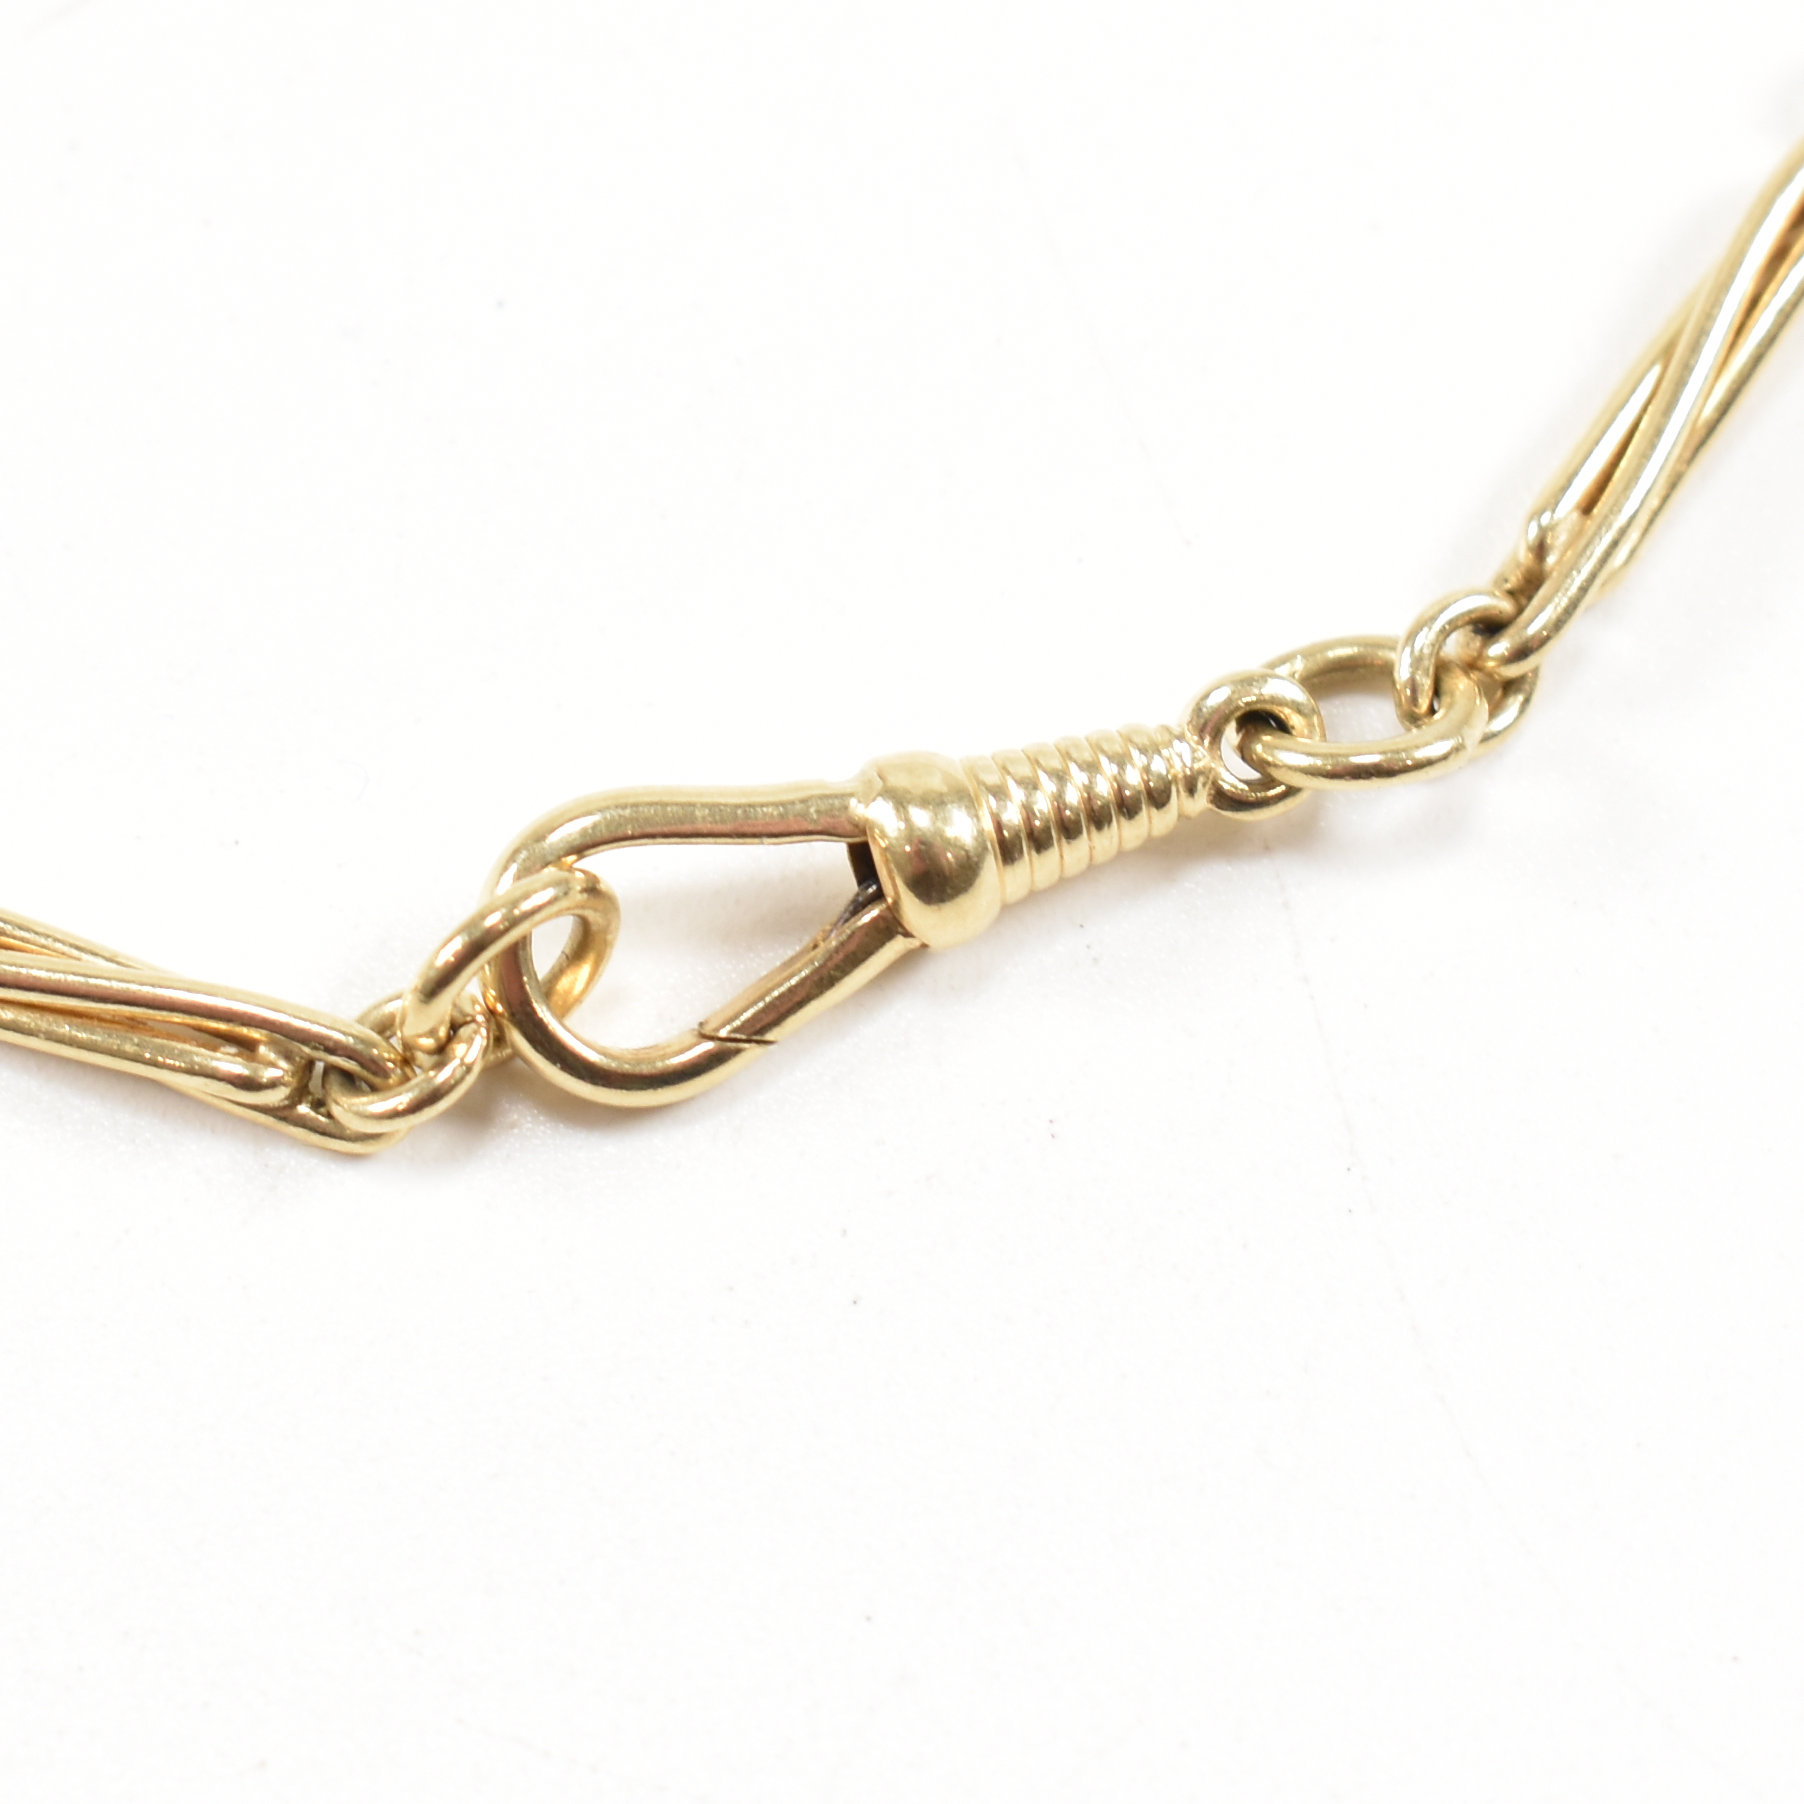 9CT GOLD TROMBONE & LOVERS KNOT NECKLACE CHAIN - Image 4 of 5